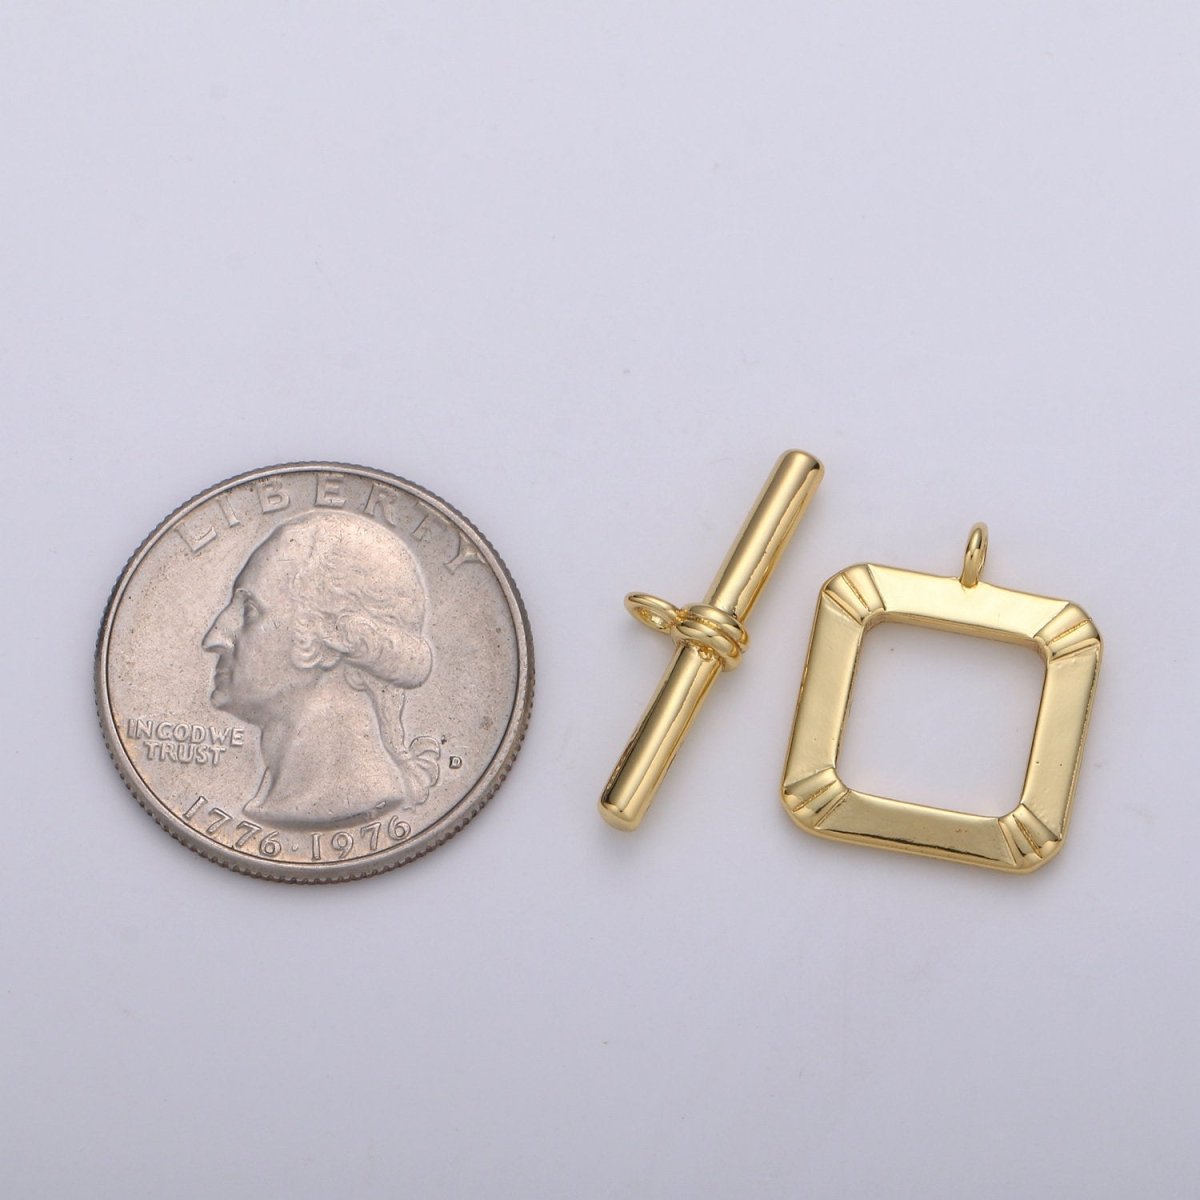 15mm 14K Gold Filled Toggle Clasp Square ot Clasp for Jewelry Making Supply K-829 - DLUXCA